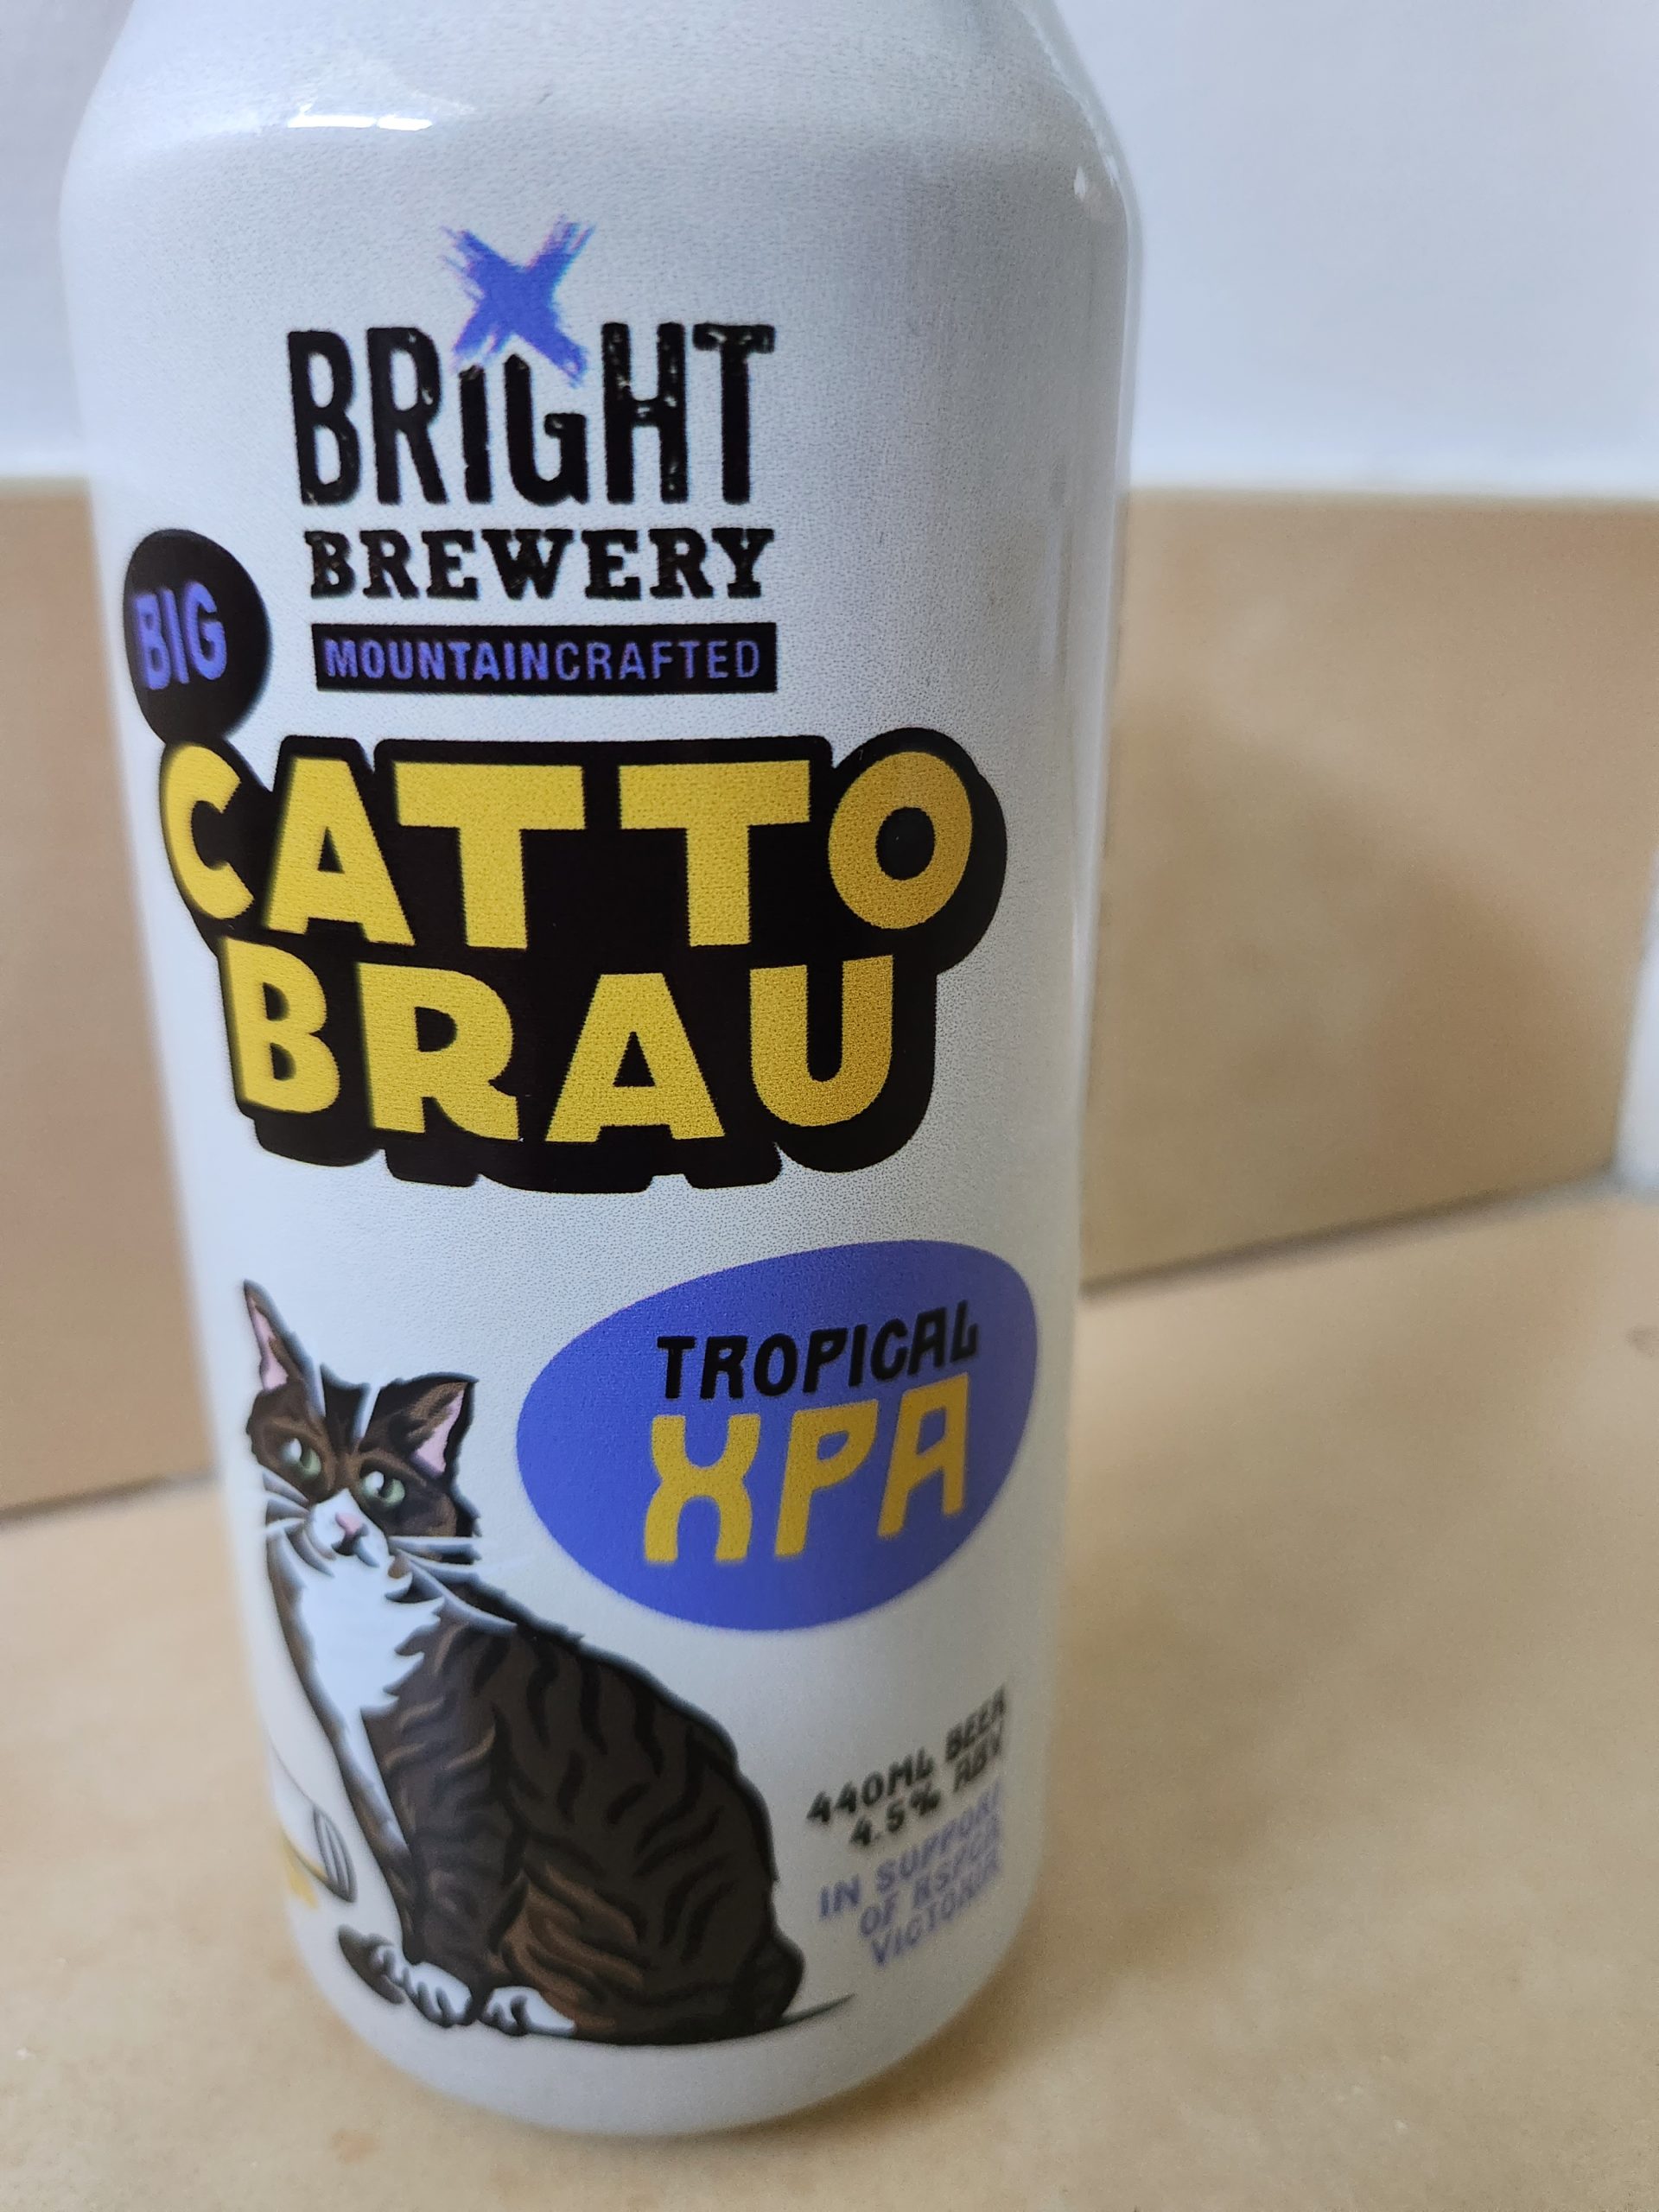 Can of Bright Brewery Catto Brau